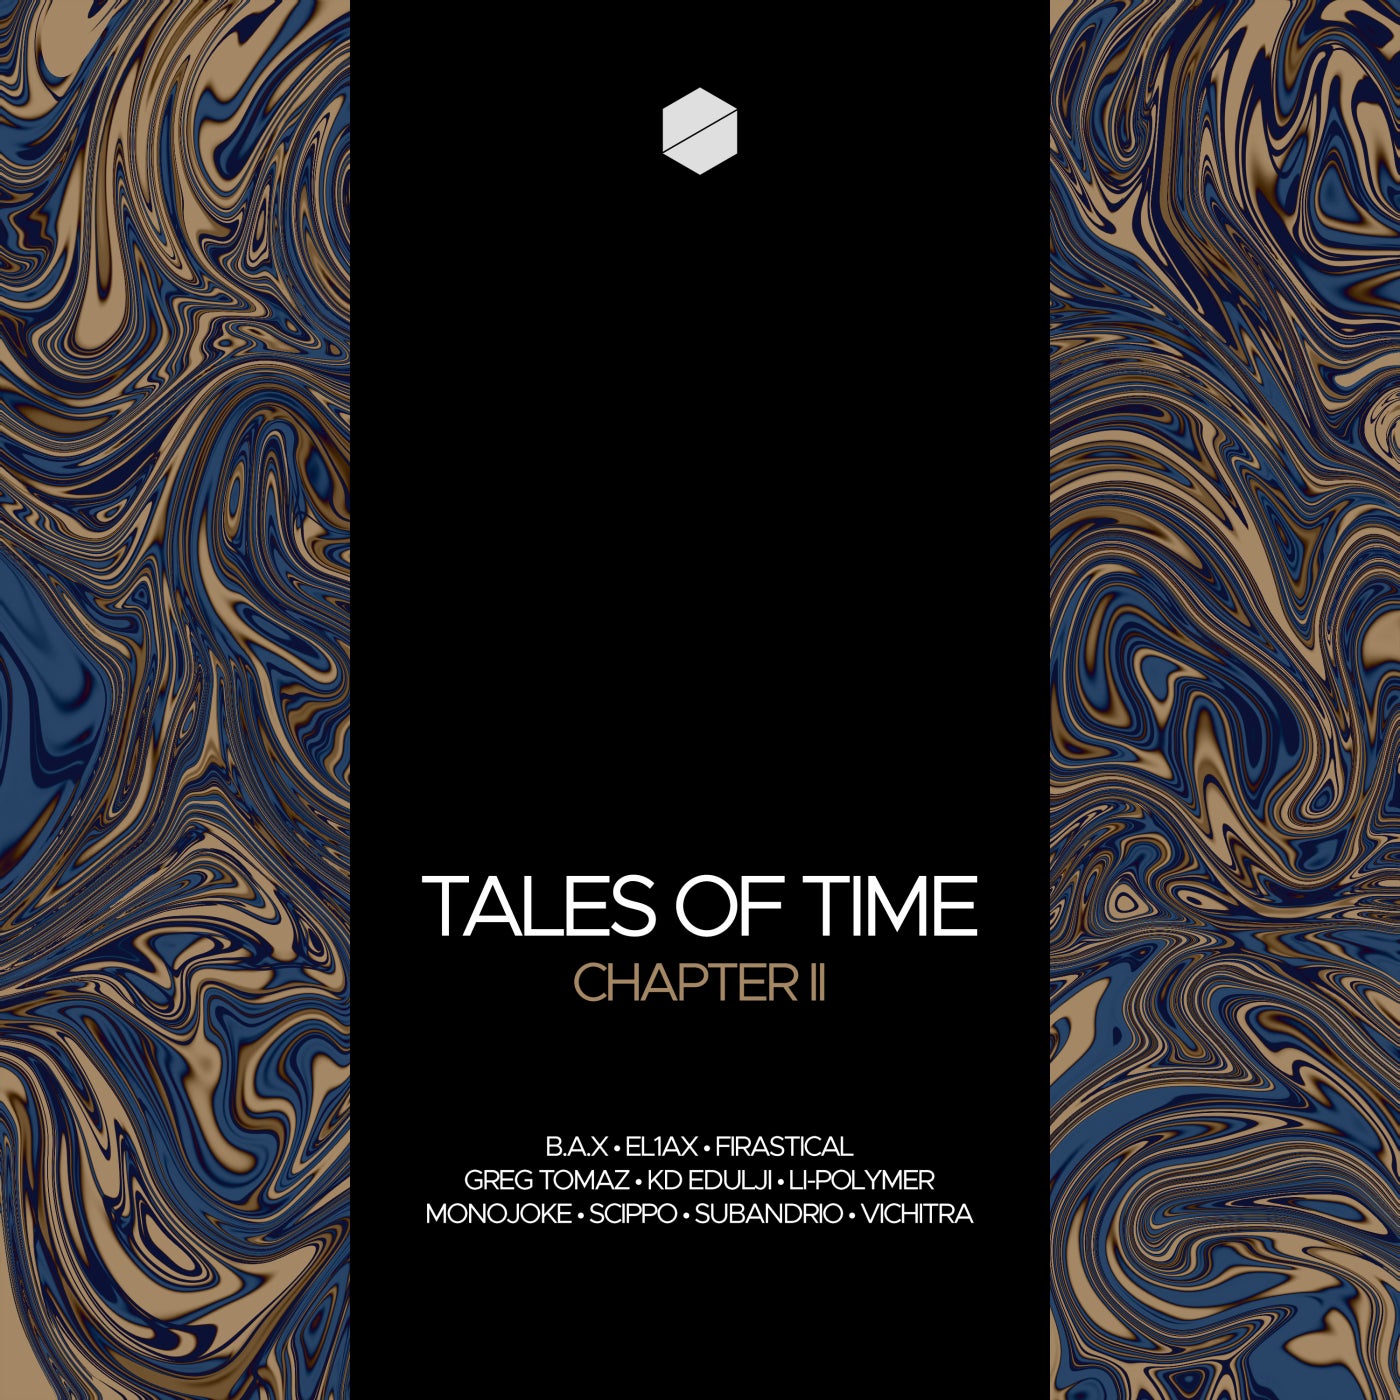 Tales of Time - Chapter 2